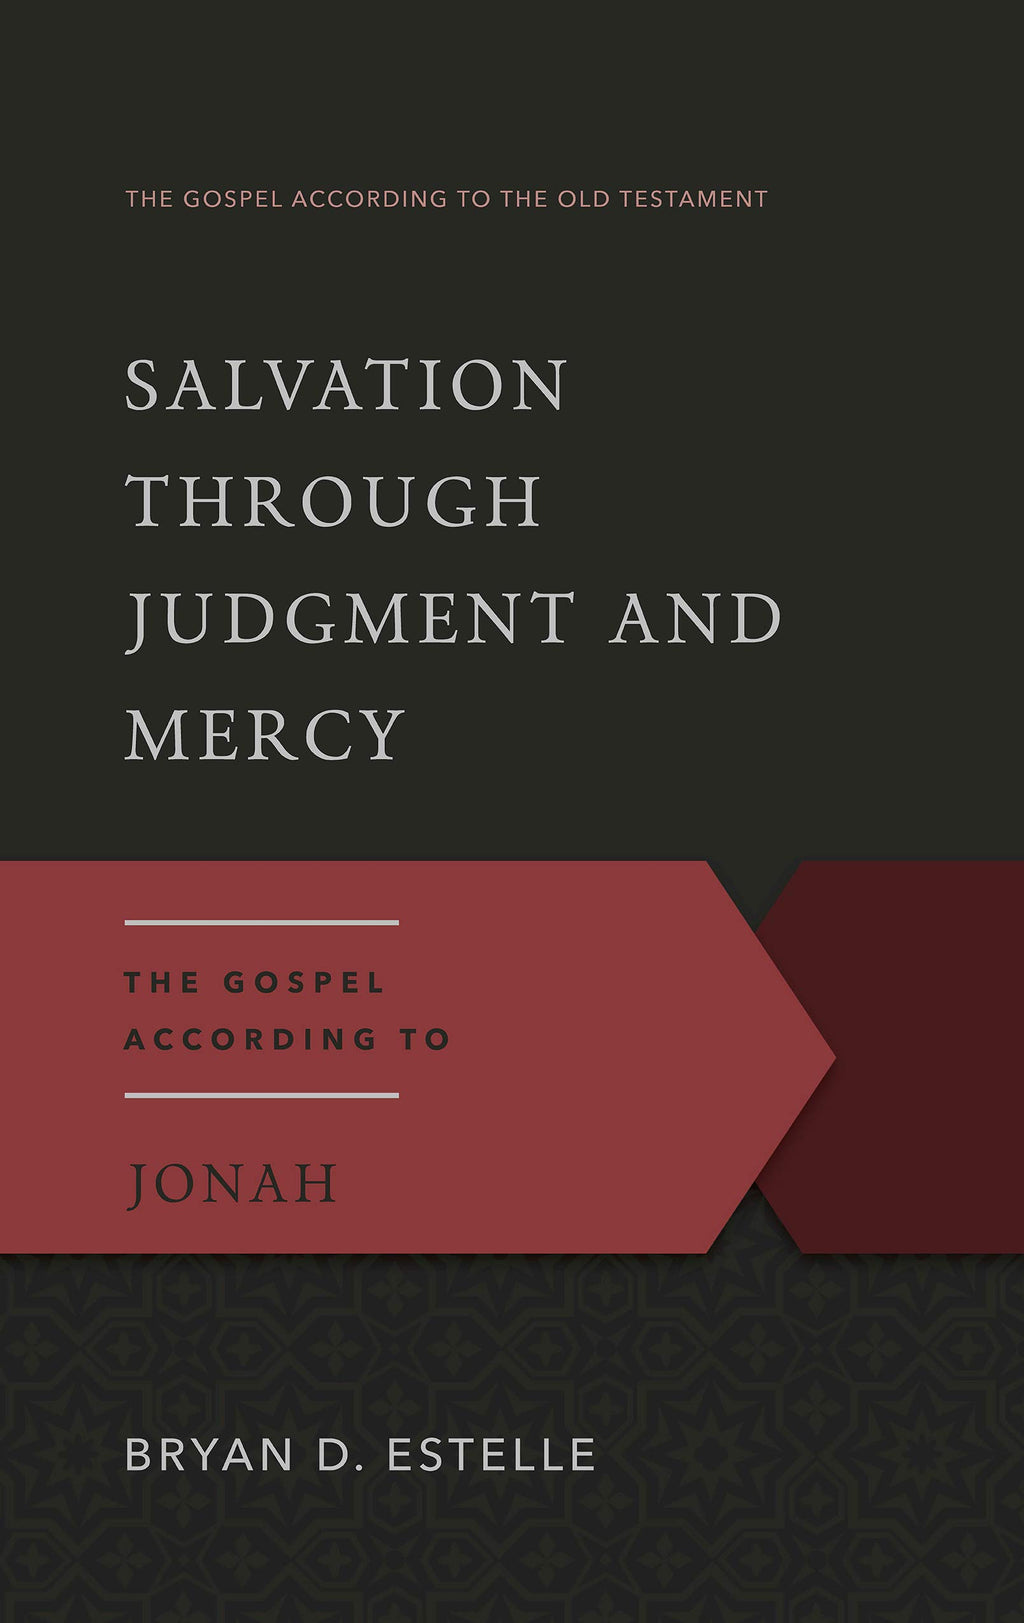 to　and　According　Westminster　–　Salvation　Mercy:　Judgment　Through　(G　Jonah　The　Gospel　Bookstore